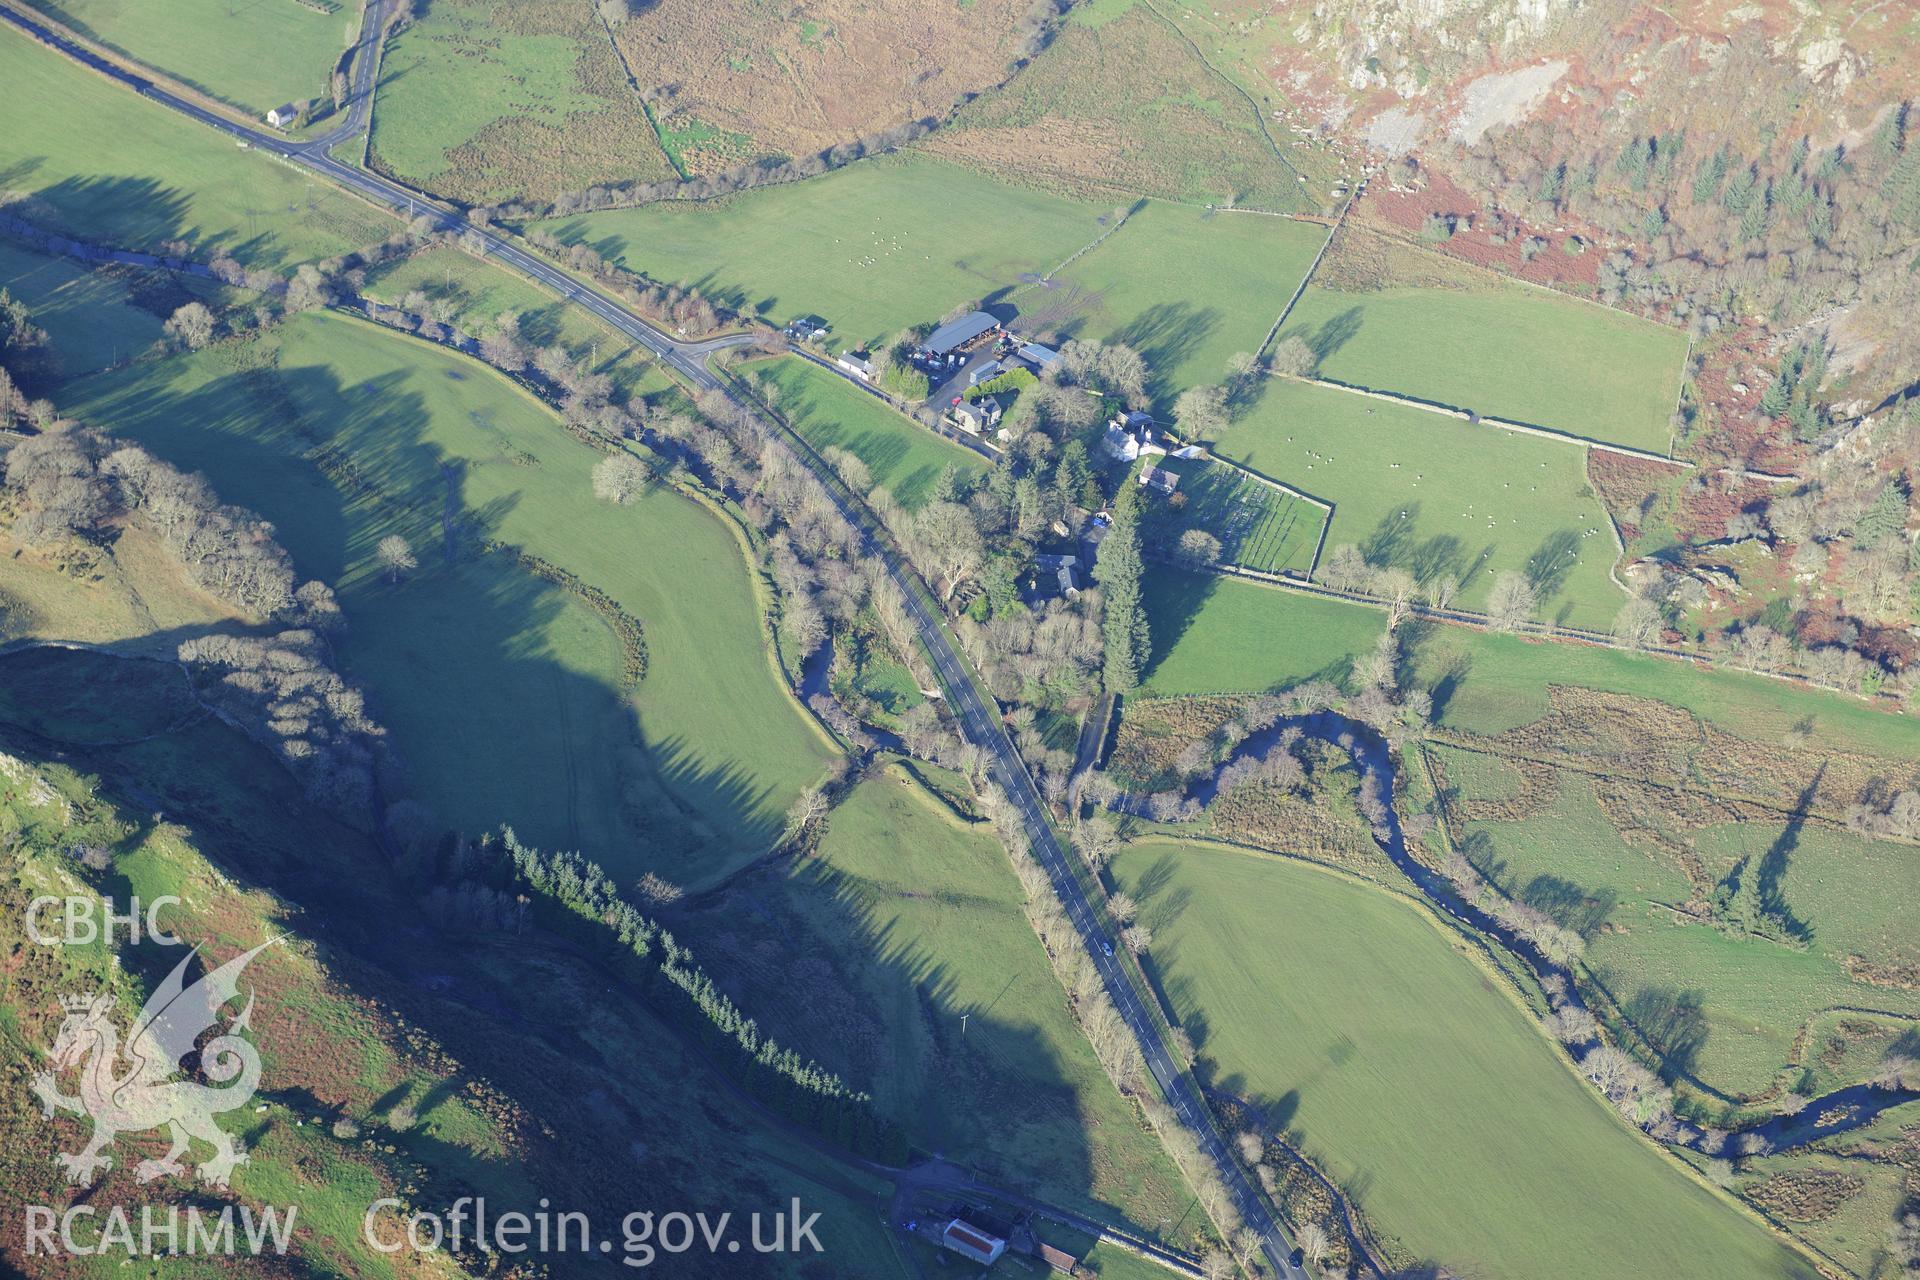 RCAHMW colour oblique photograph of Dolbenmaen Castle Mound, and village. Taken by Toby Driver on 10/12/2012.